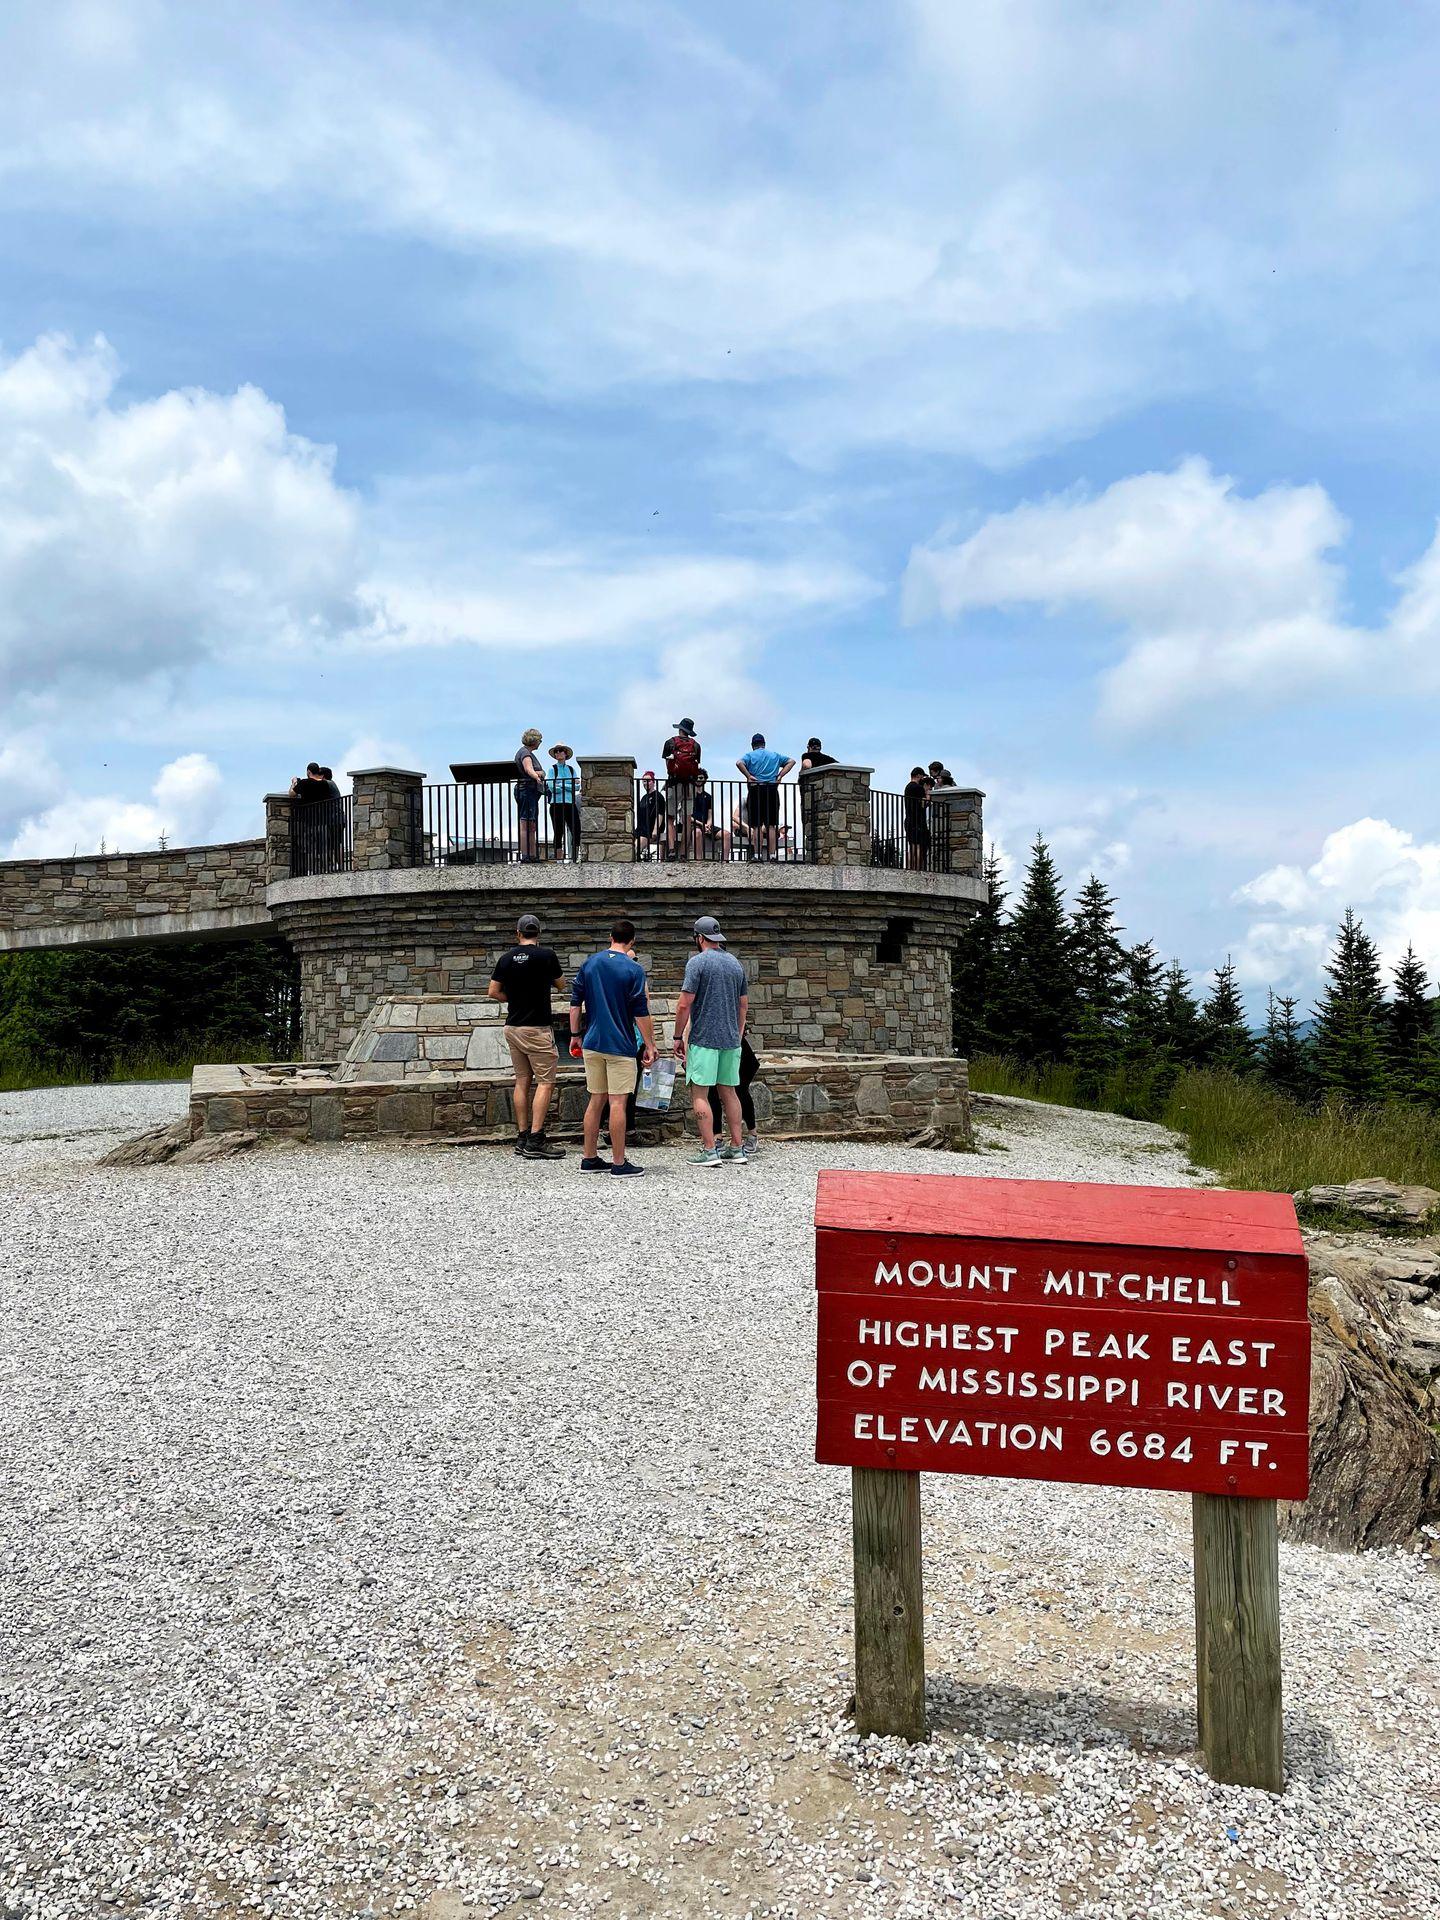 A sign for the top of Mount Mitchell and a viewing platform in the background.